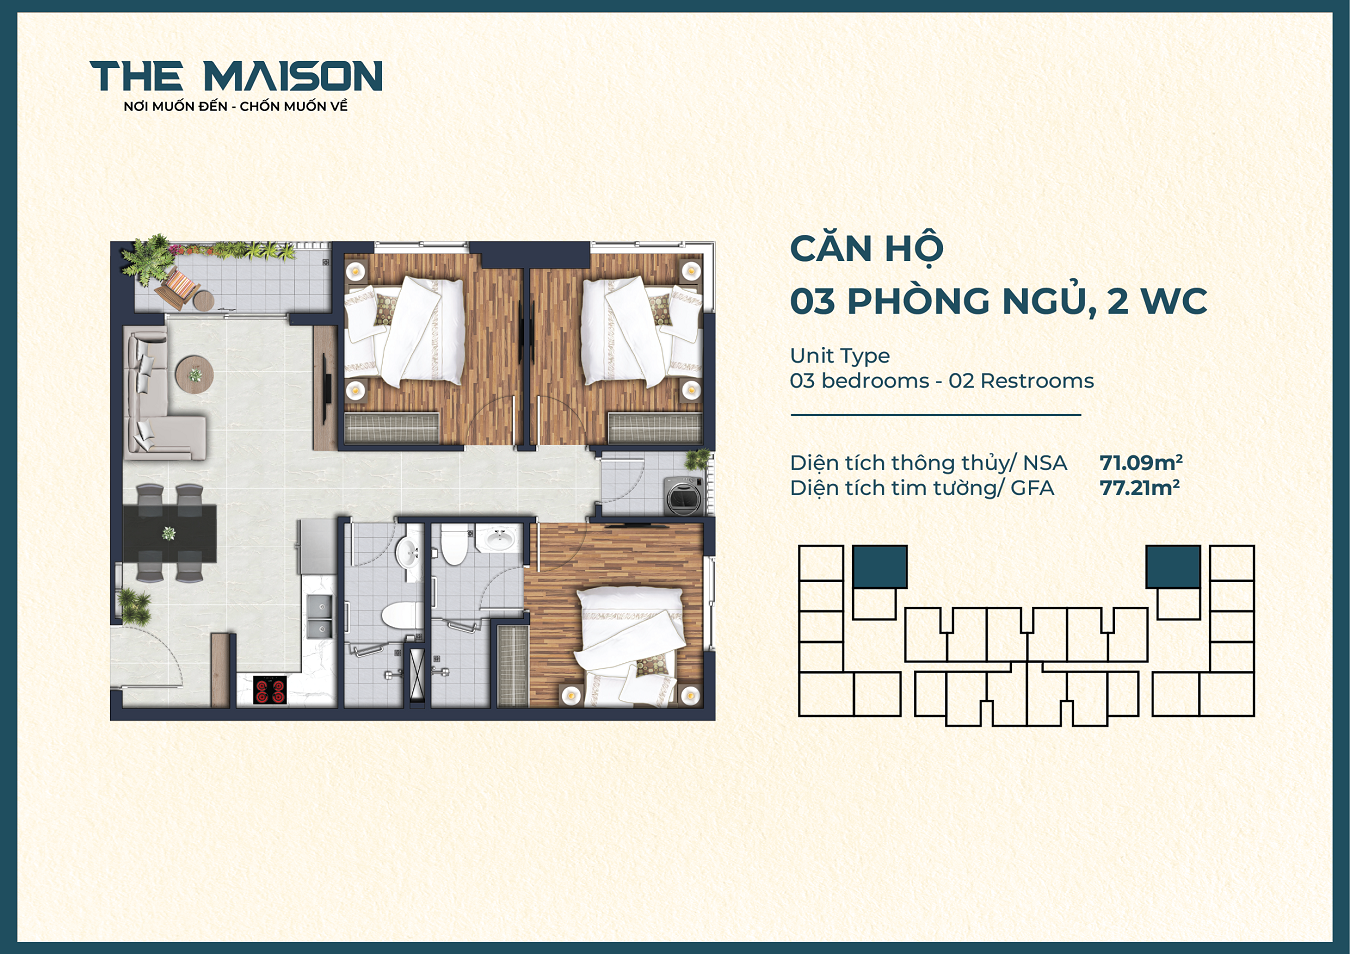 THE MAISON_MB CAN HO_77.21m